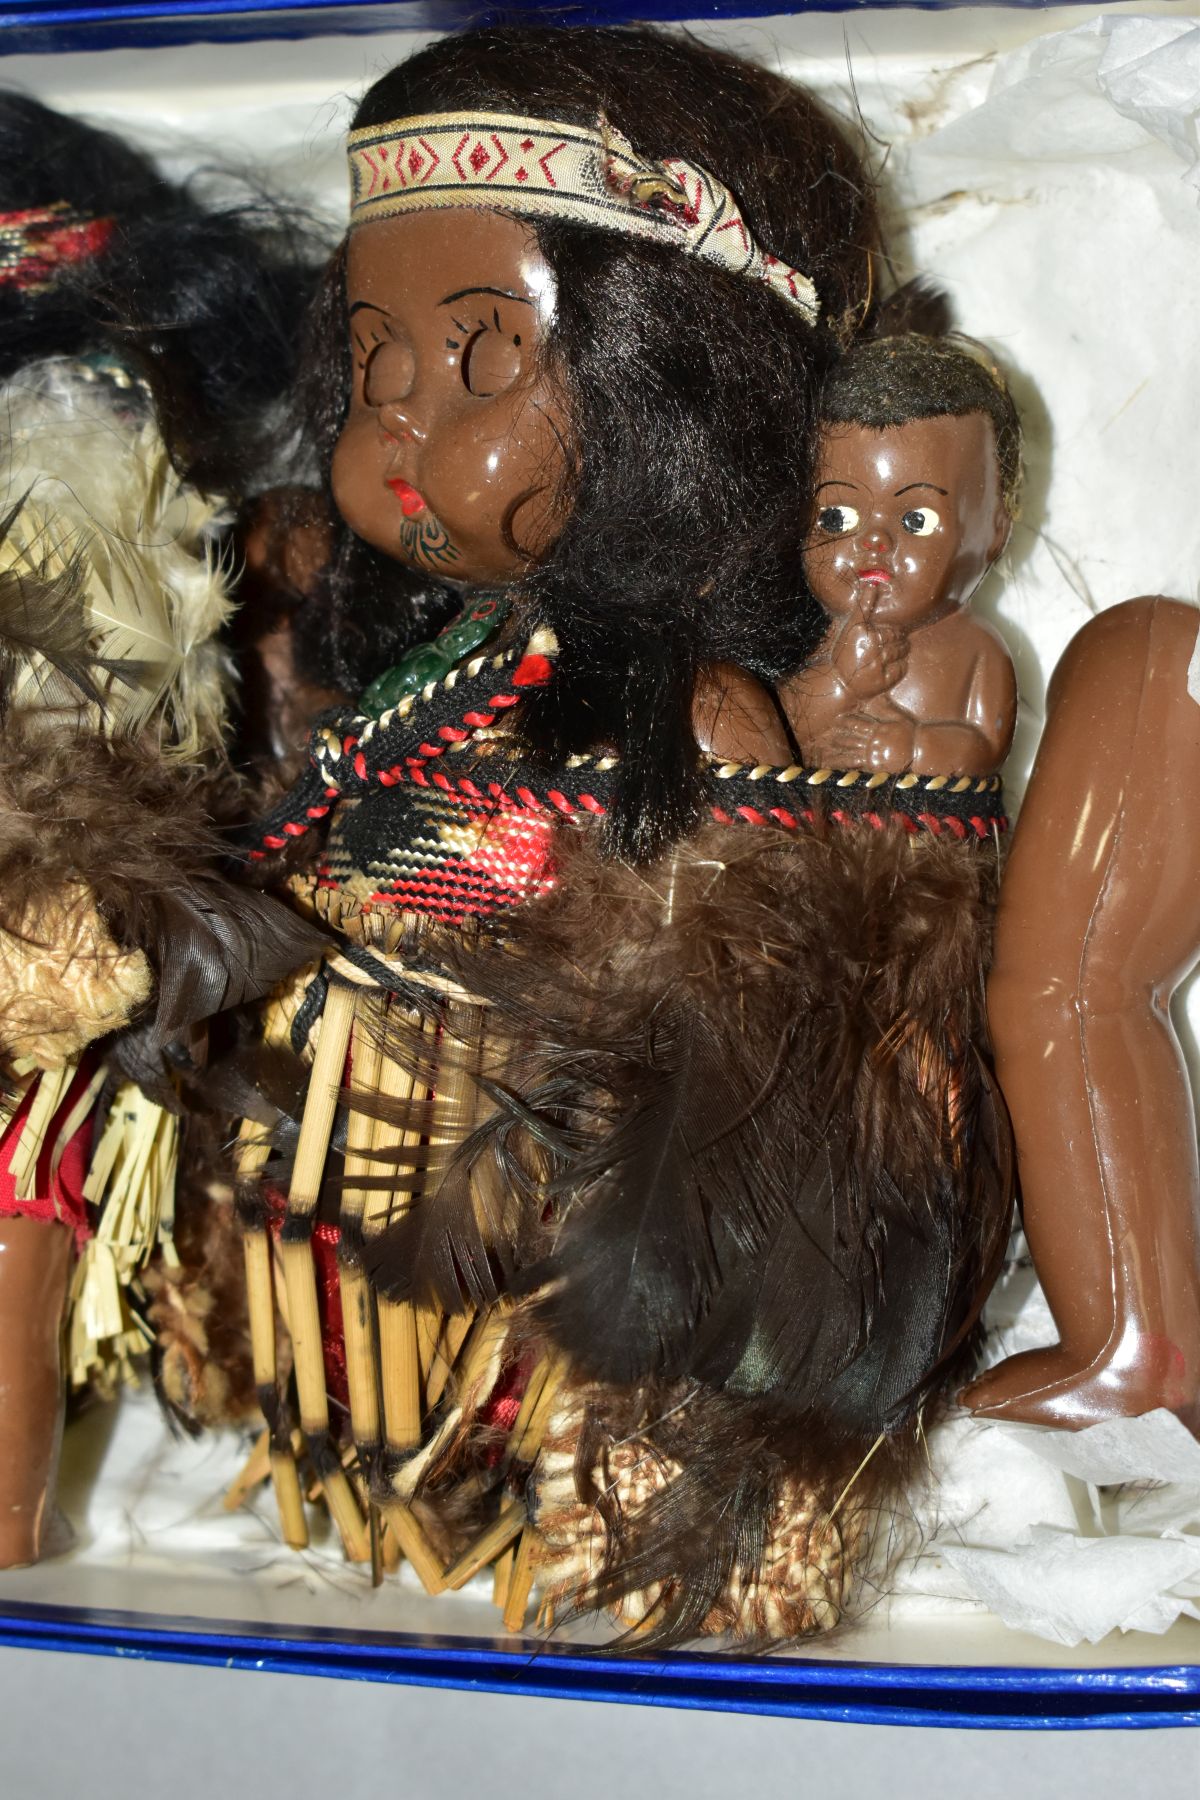 VINTAGE COLLECTORS DOLLS, comprising a Maori? woman with child, tiki pendant around her neck, - Image 5 of 7